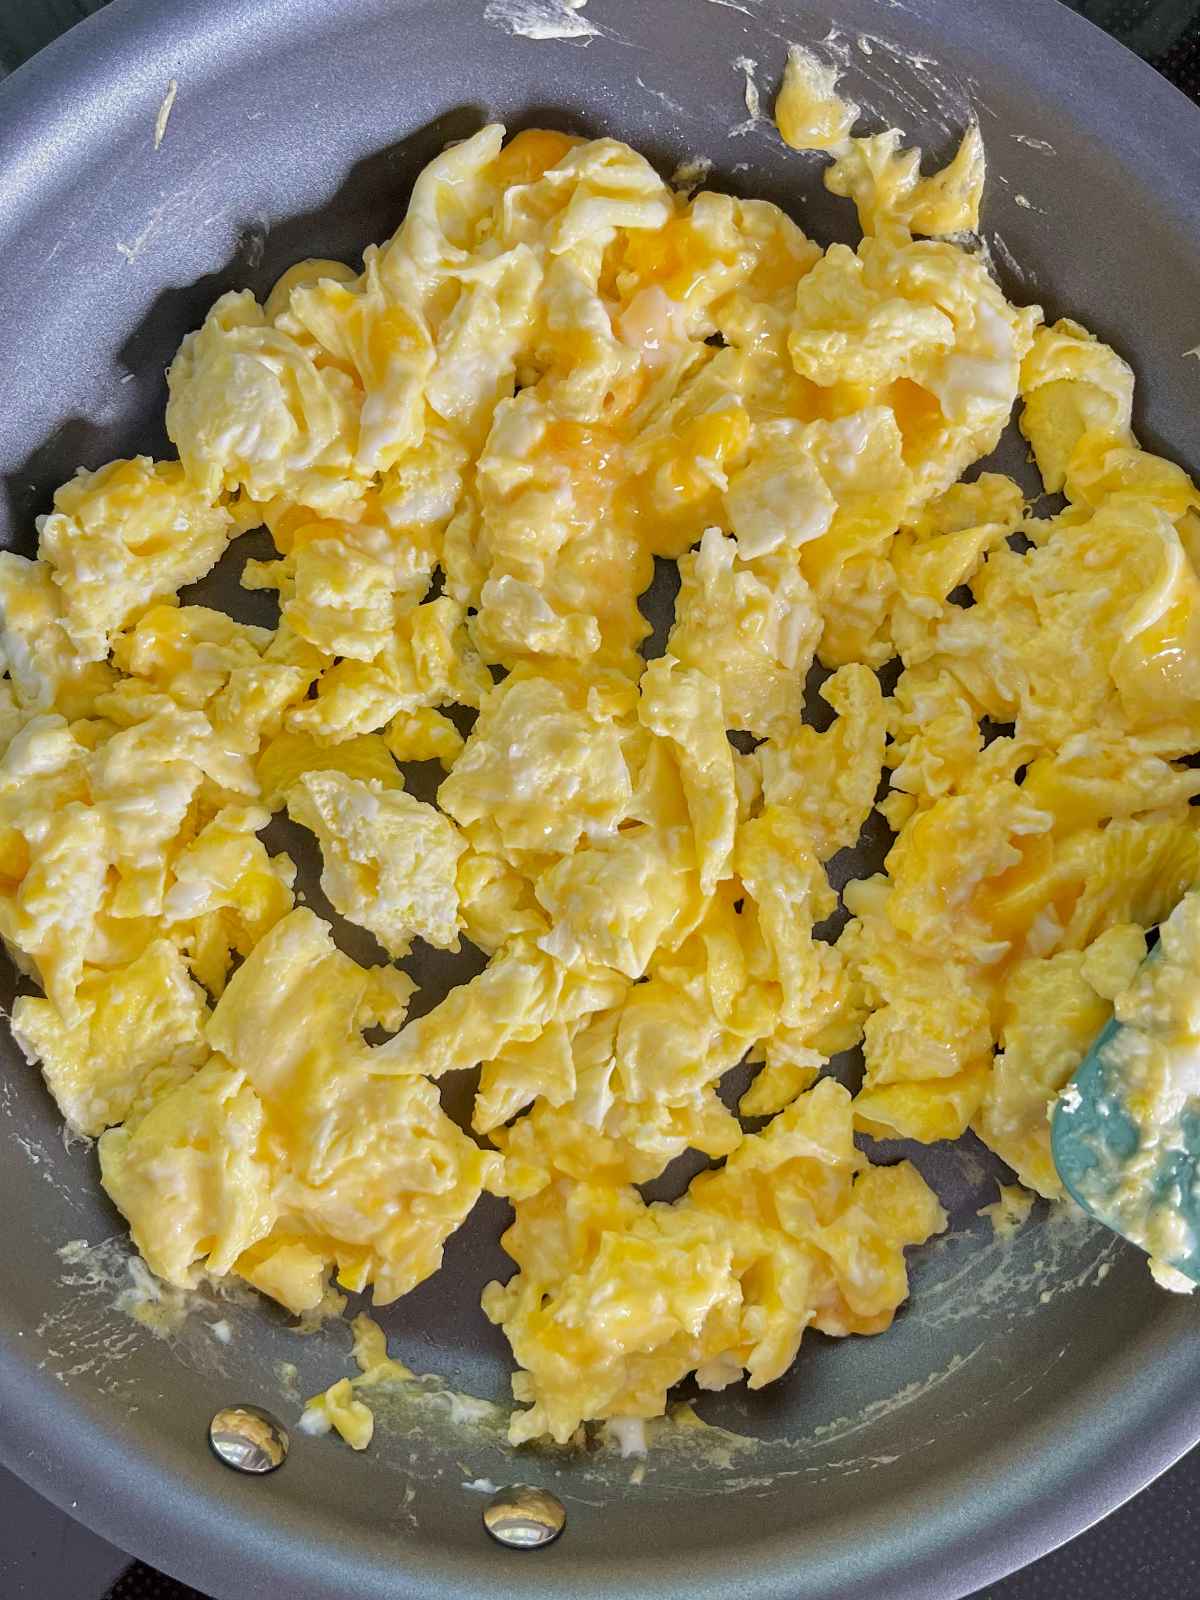 Scrambled eggs with bits of melted cheese in a dark grey non stick pan.